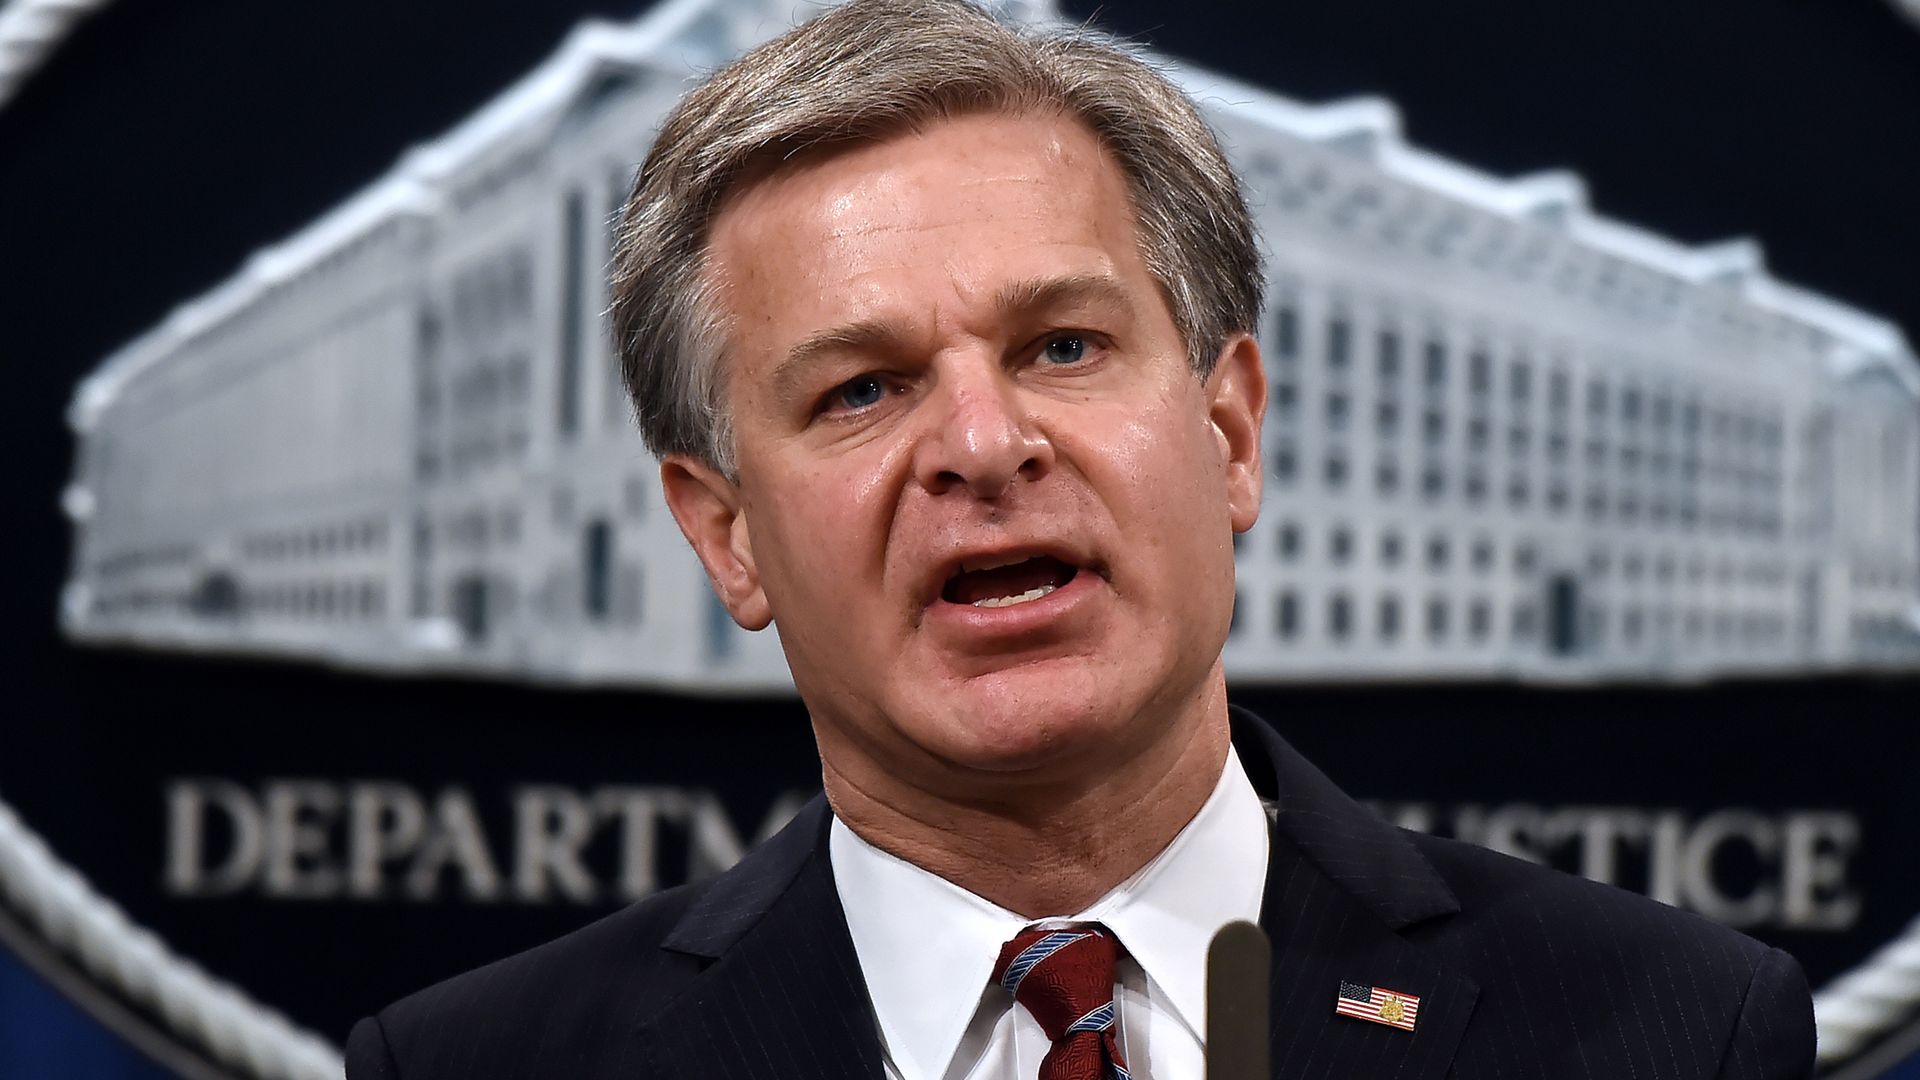 FBI Director Christopher Wray warned Congress that Hamas’ terror attacks on Israel could lead to threats in the U.S.